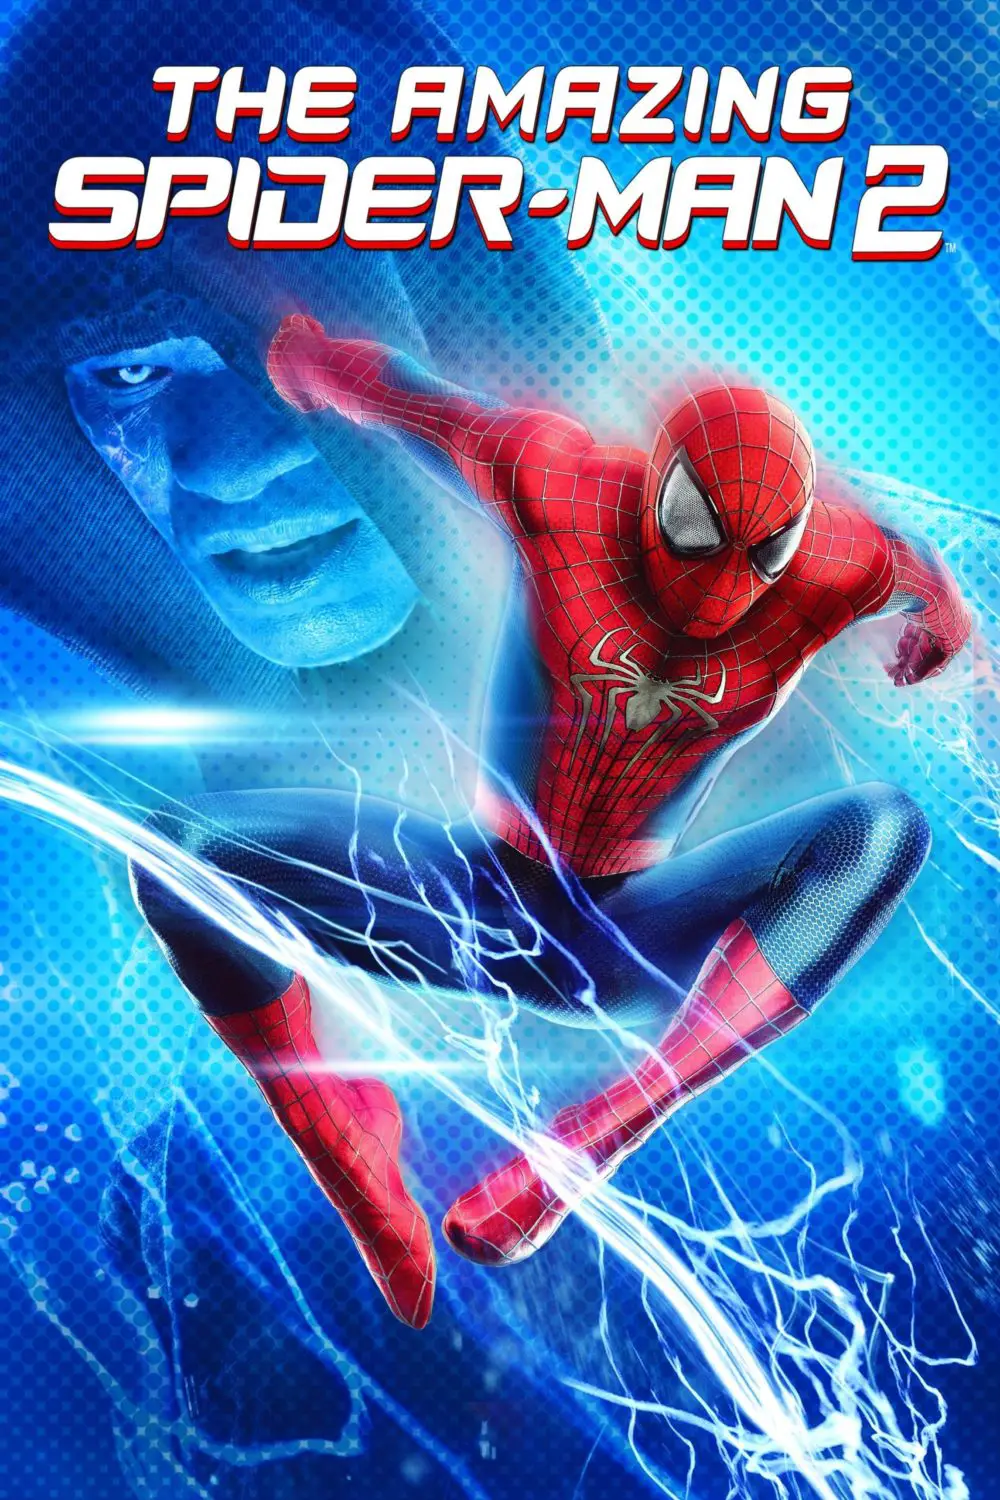 You are currently viewing The Amazing Spider-Man 2